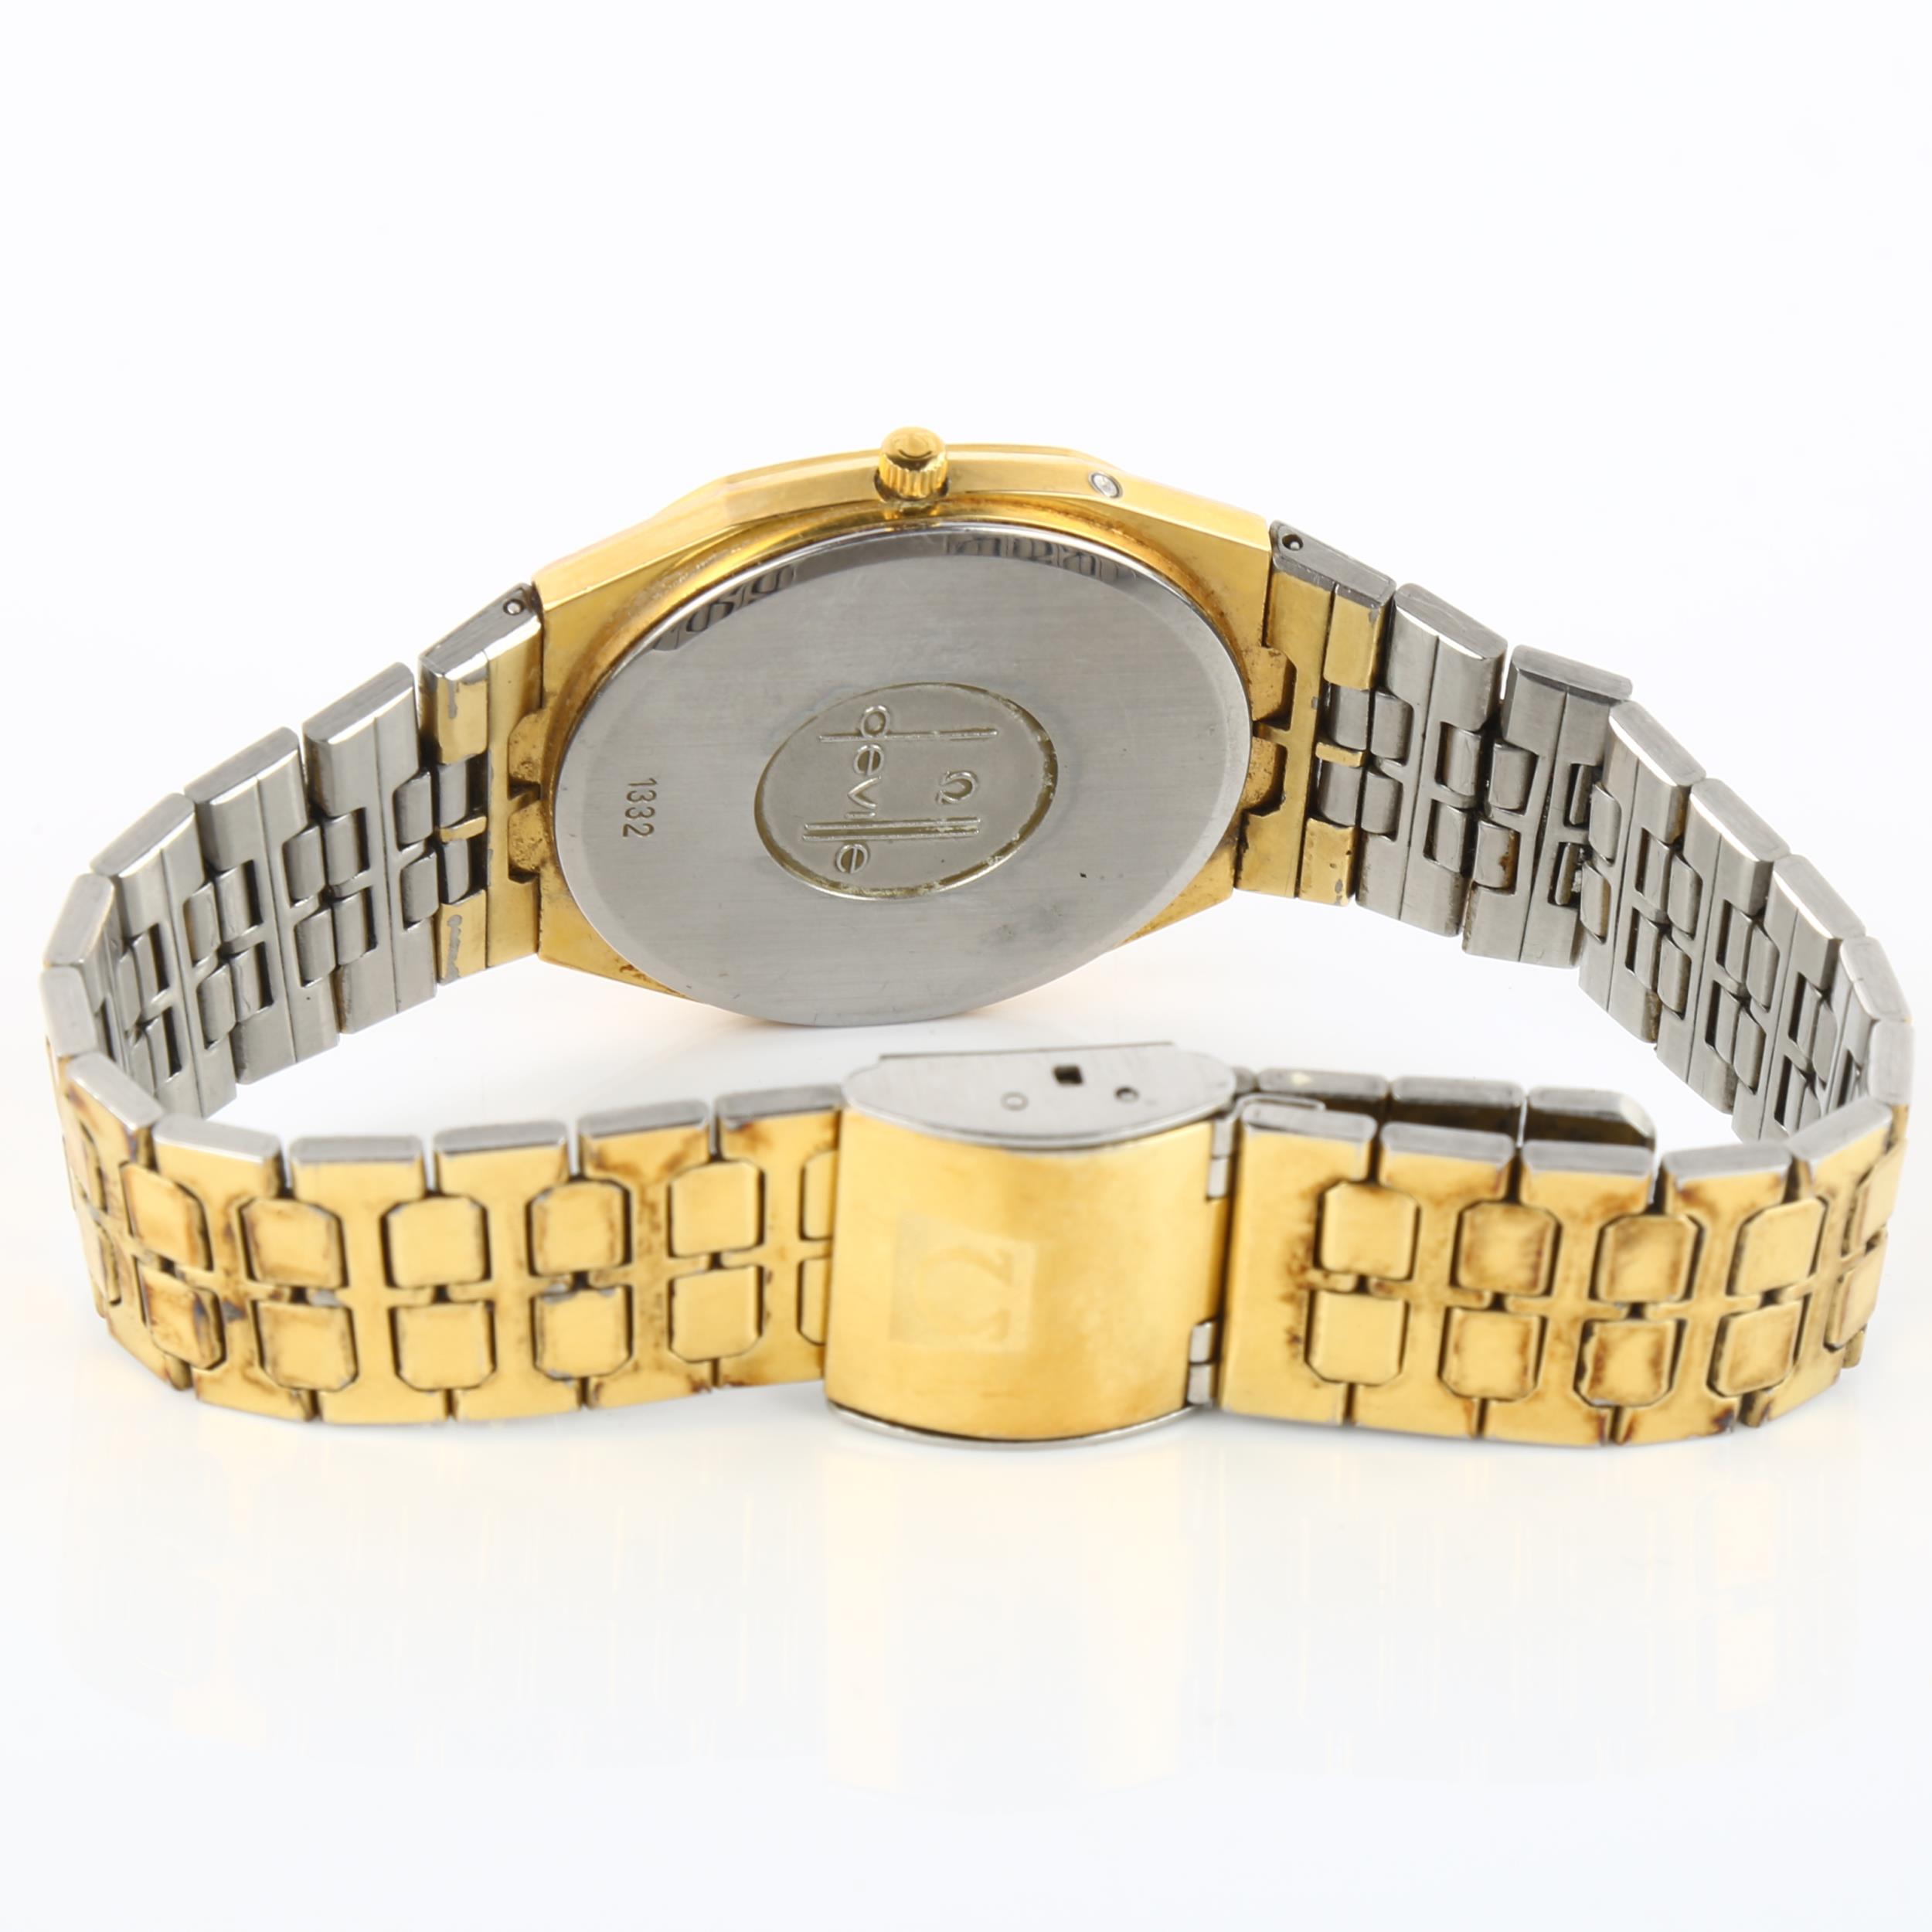 OMEGA - a gold plated stainless steel De Ville quartz bracelet watch, ref. 1332, champagne dial with - Image 4 of 5